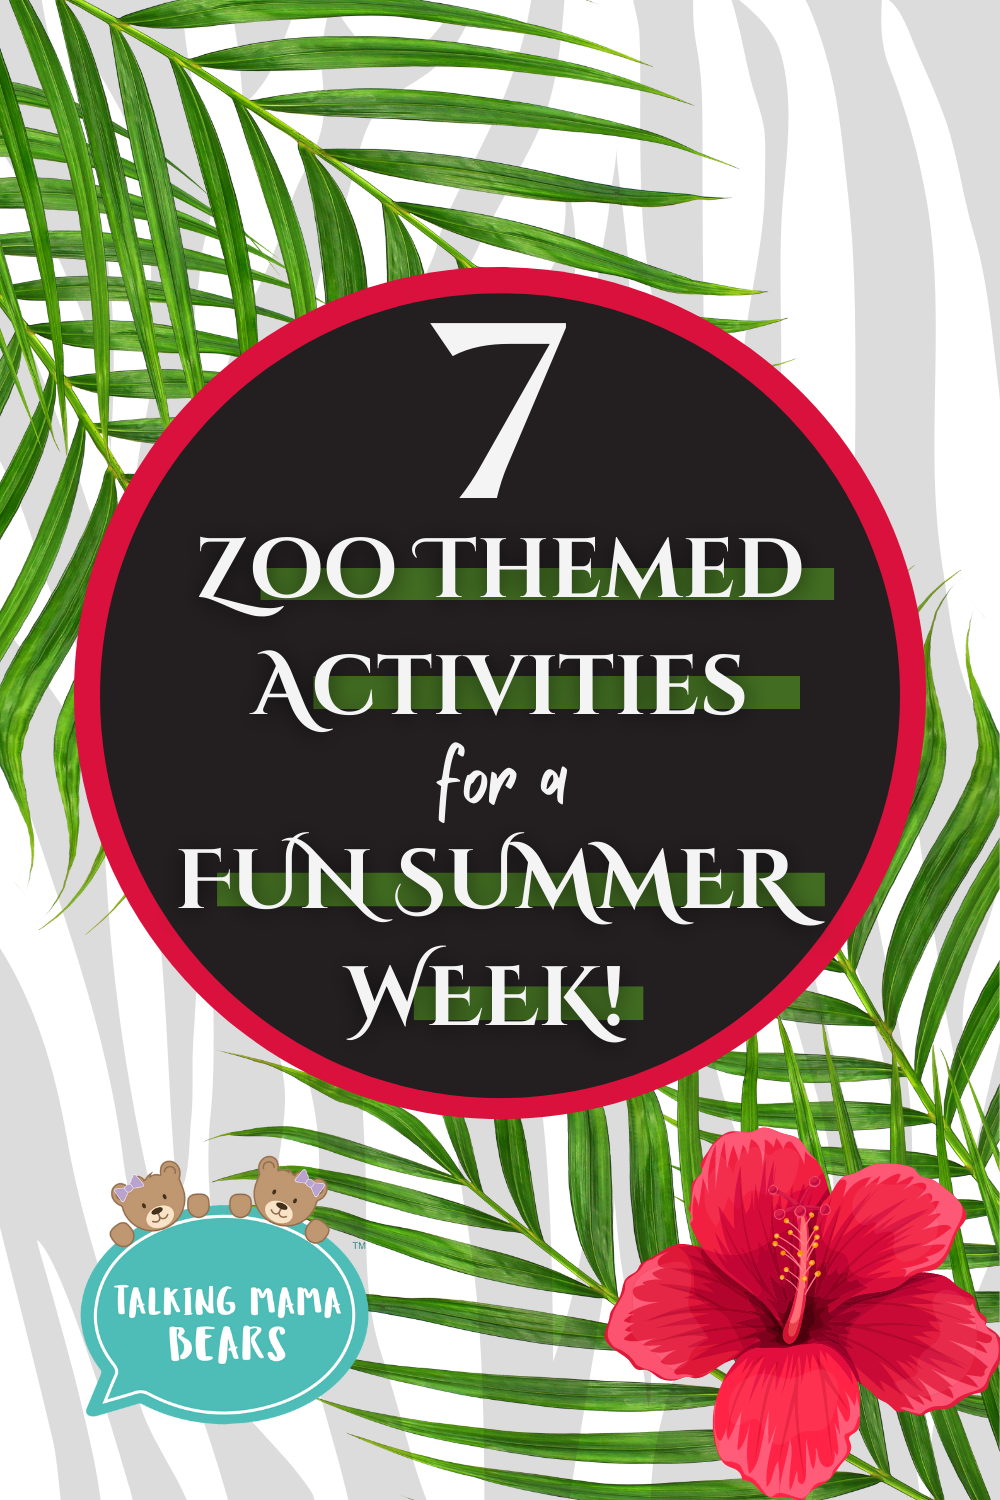 7 fun summer activities for a zoo theme